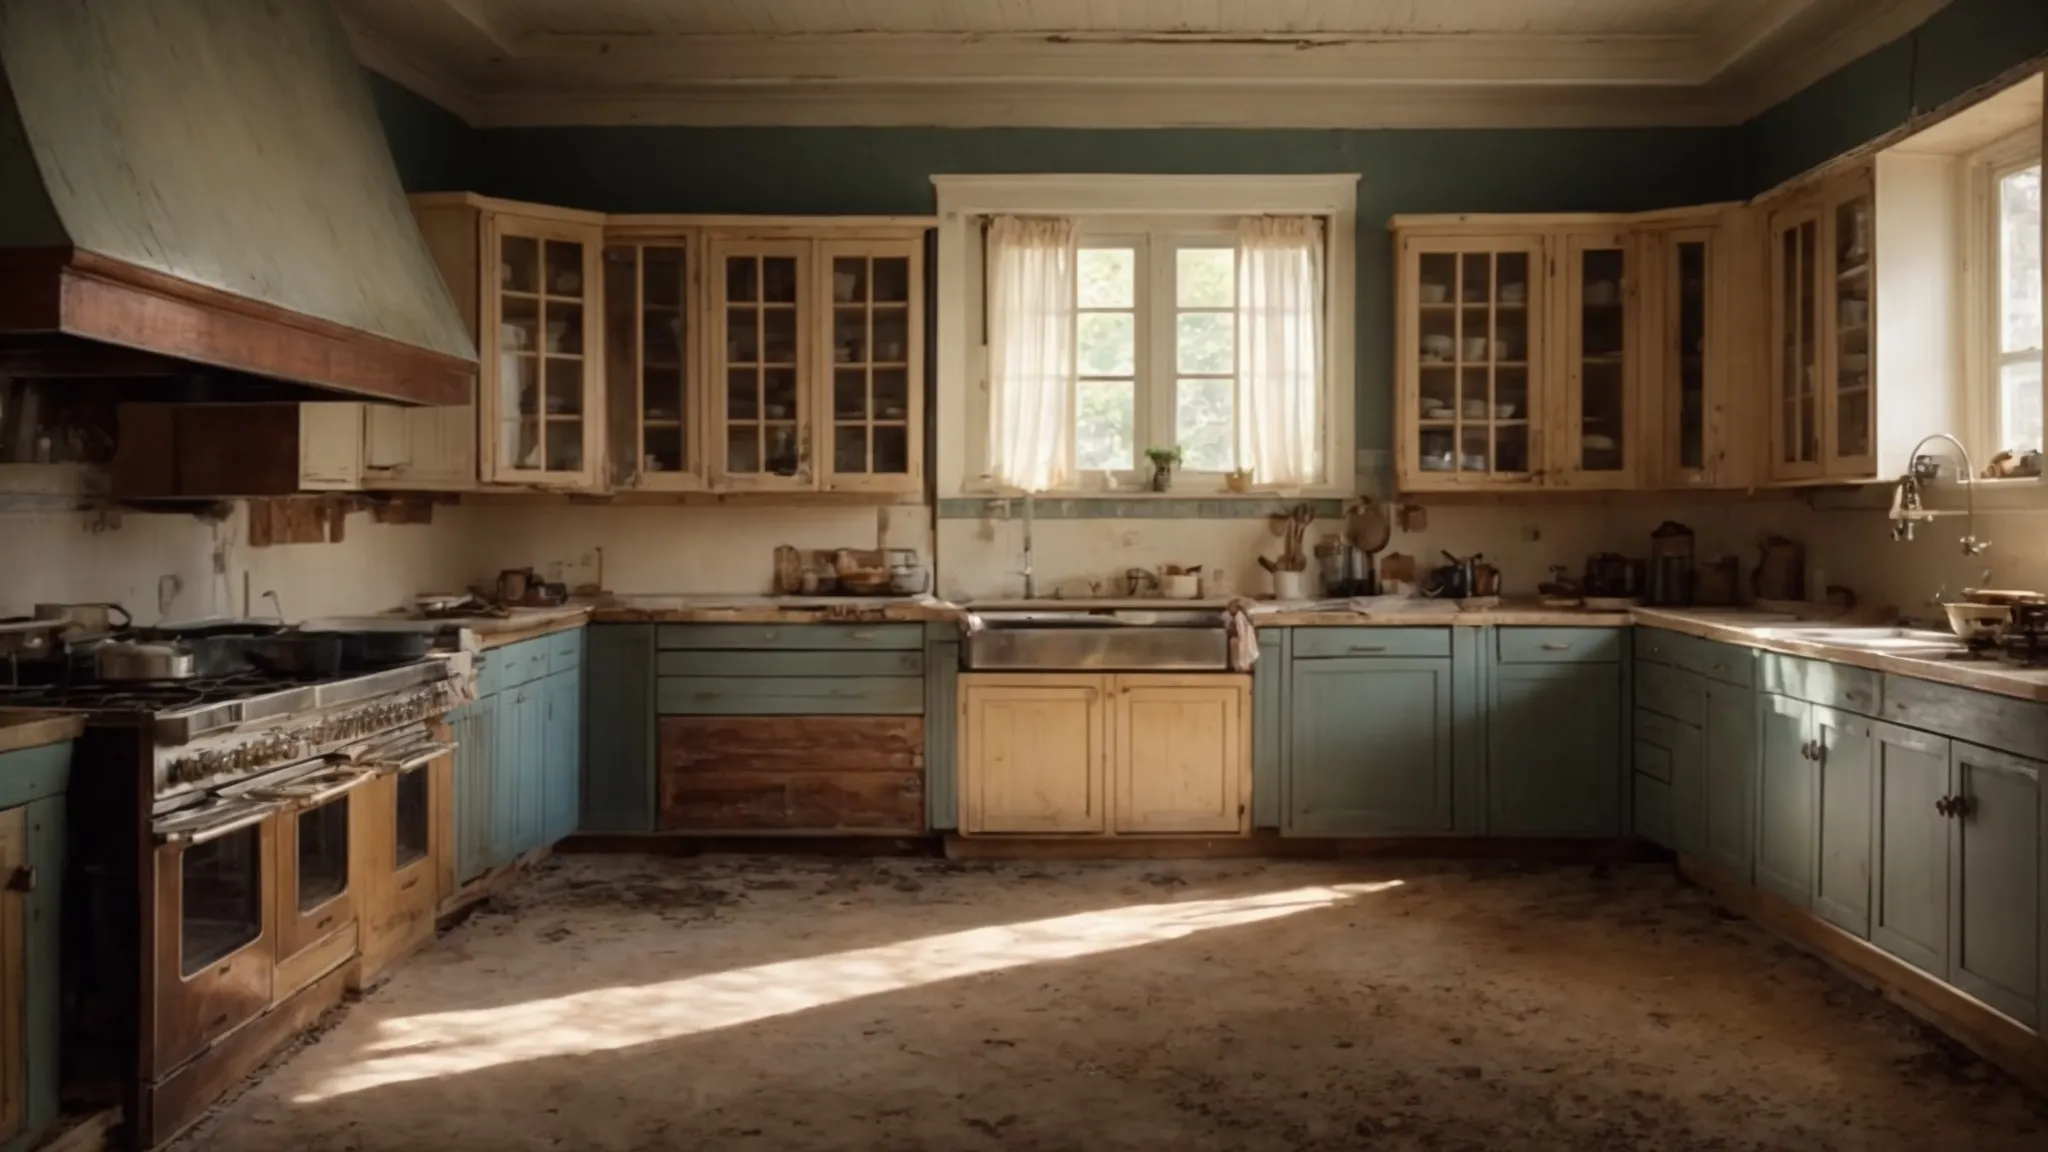 a wide-angle view of an empty, outdated kitchen awaiting renovation, with visible aged cabinetry and appliances.